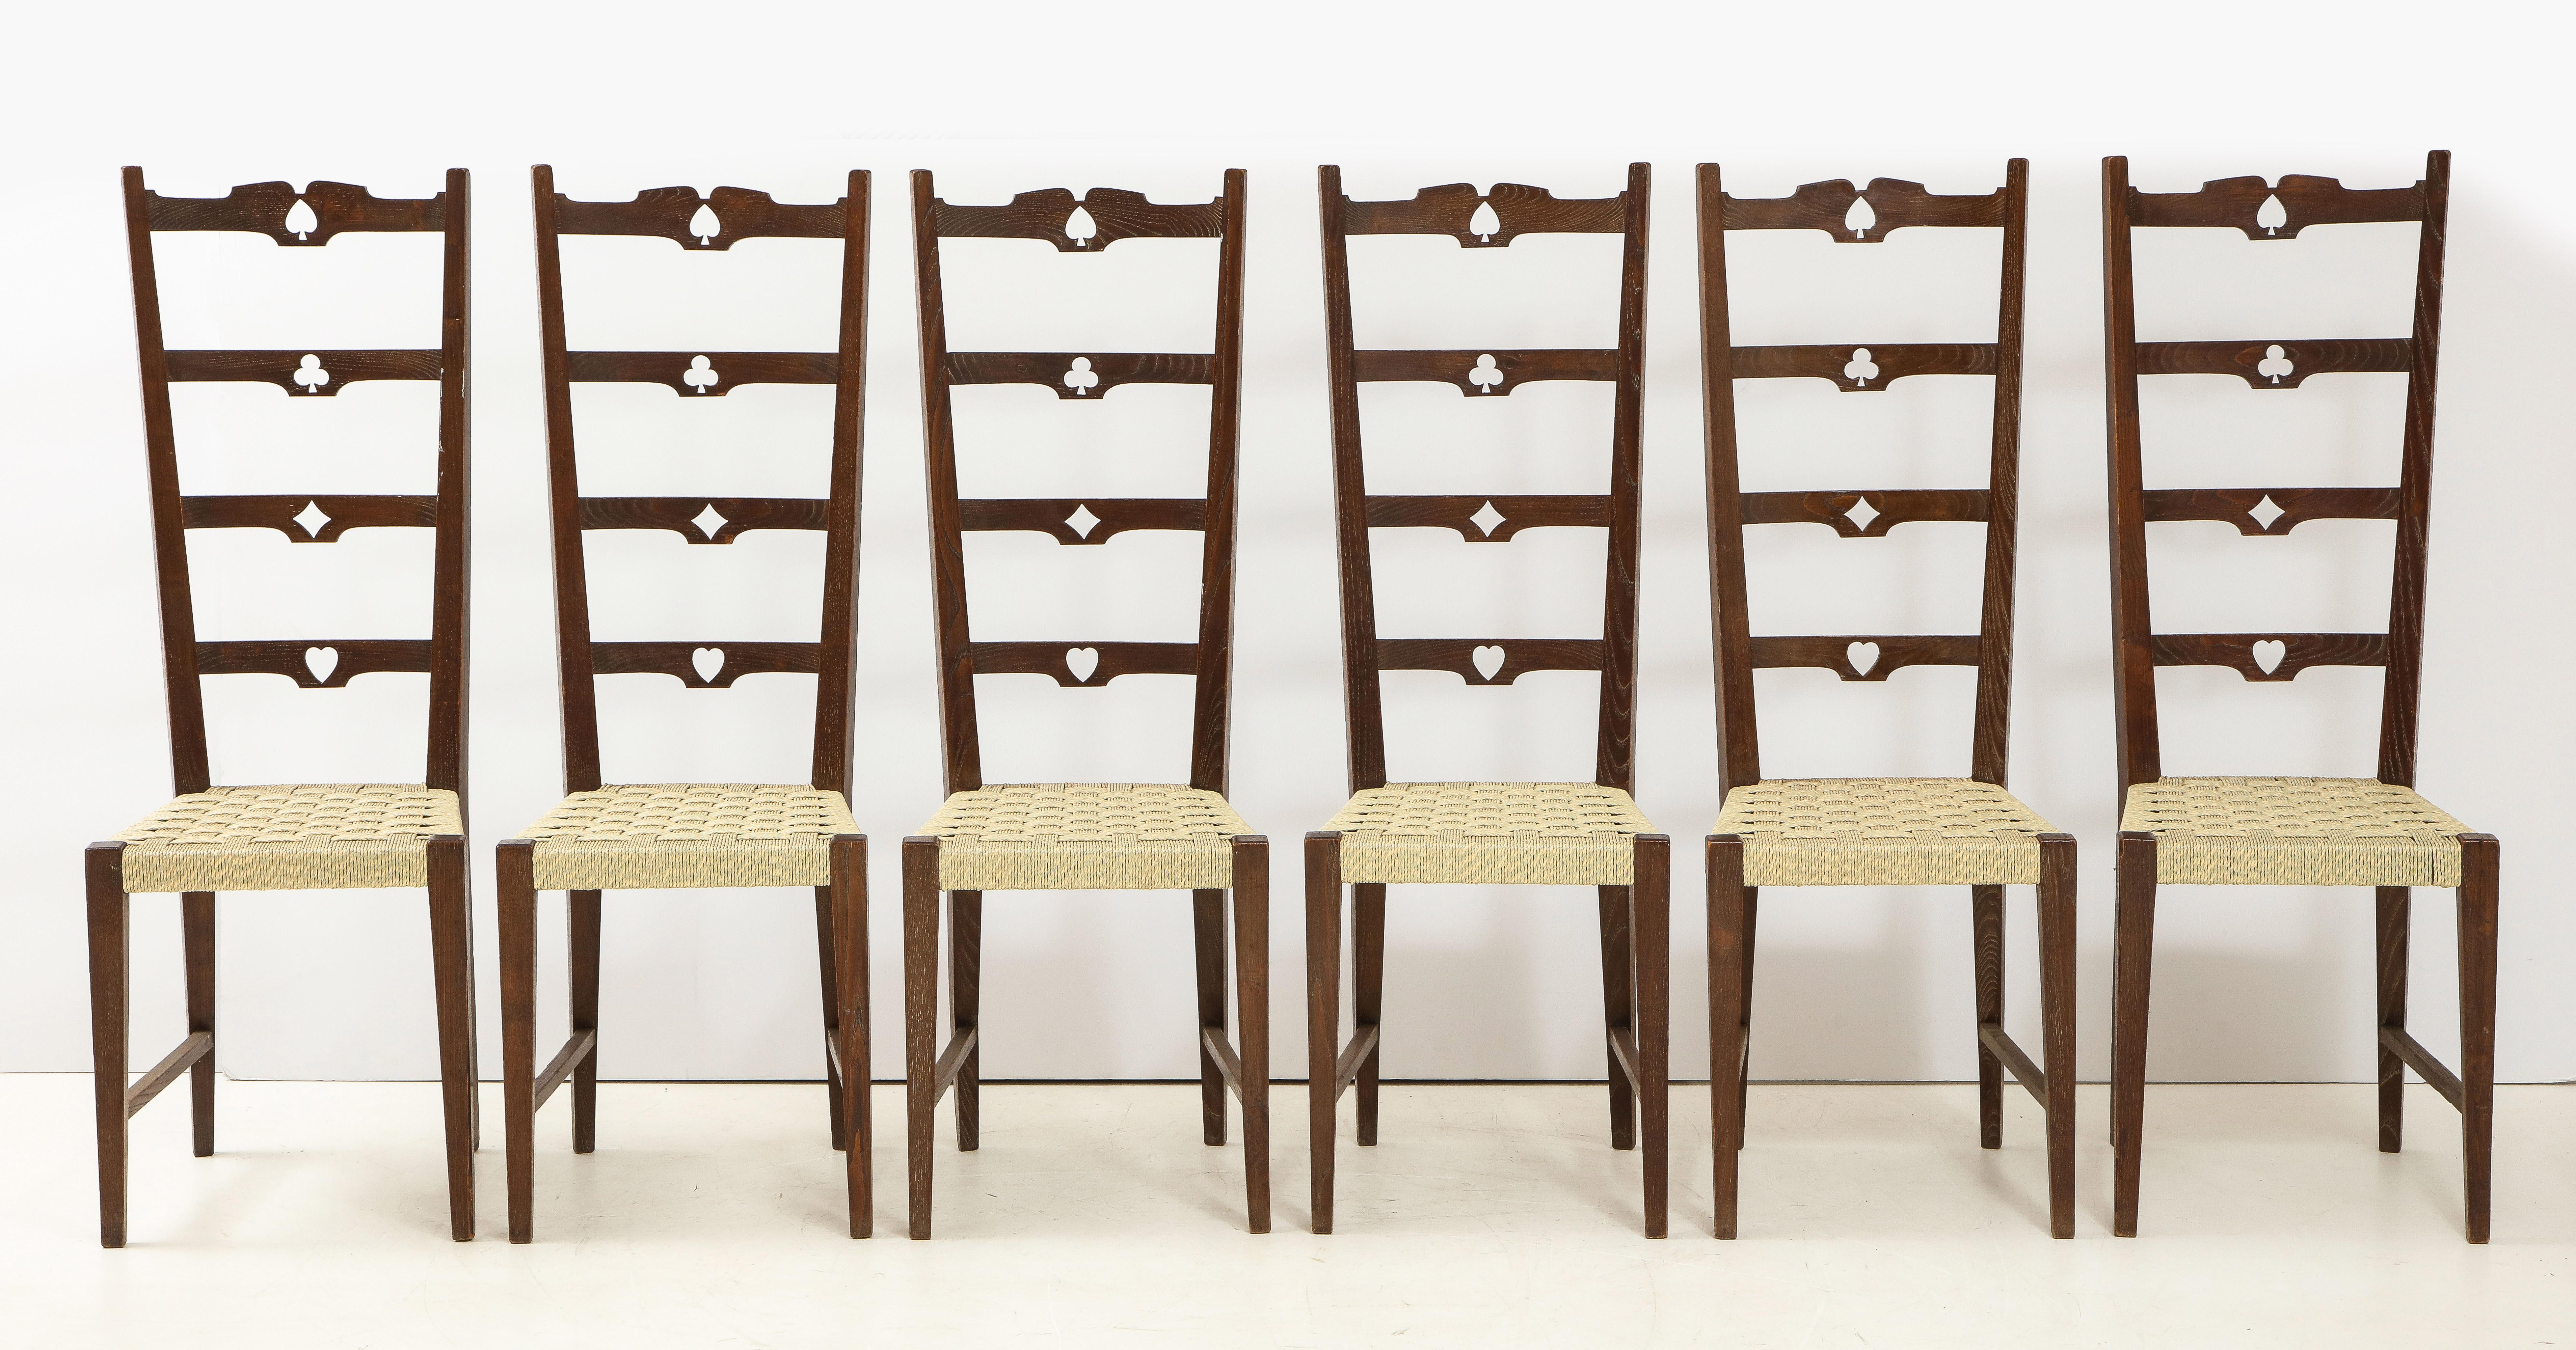 Very unique Italian rustic set of six walnut ladder back chairs; the back slats decorated with carved motifs of the four playing card symbols: clubs (?), diamonds (?), hearts (?), and spades (?). The seats covered in faux straw; the chairs are